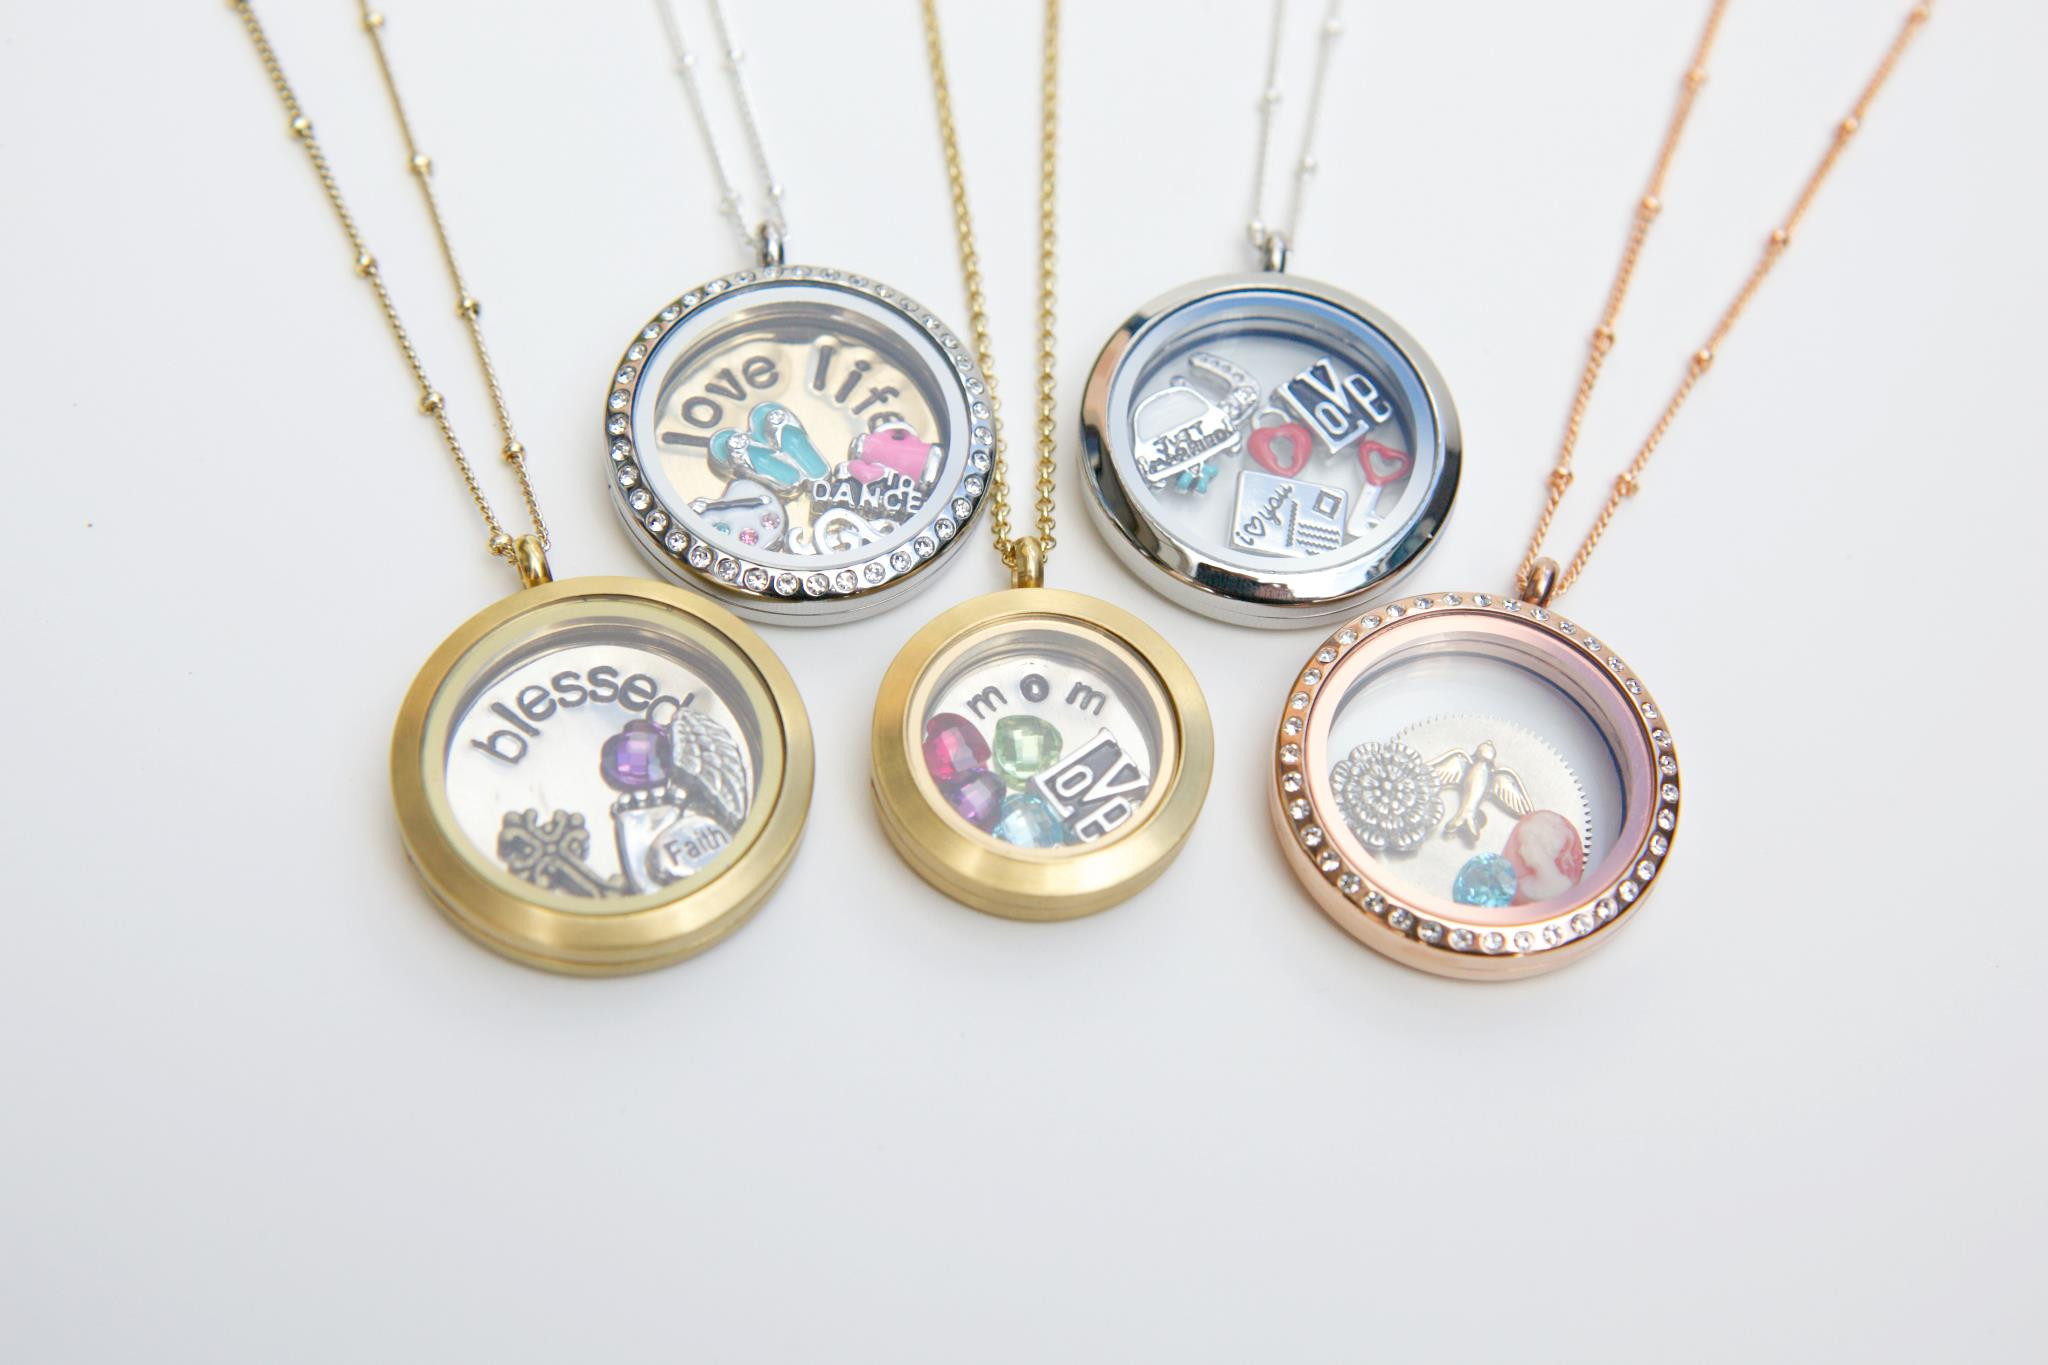 Origami Owl Style Jewelry Buy Origami Owl Jewelry Online Charms Necklace Products